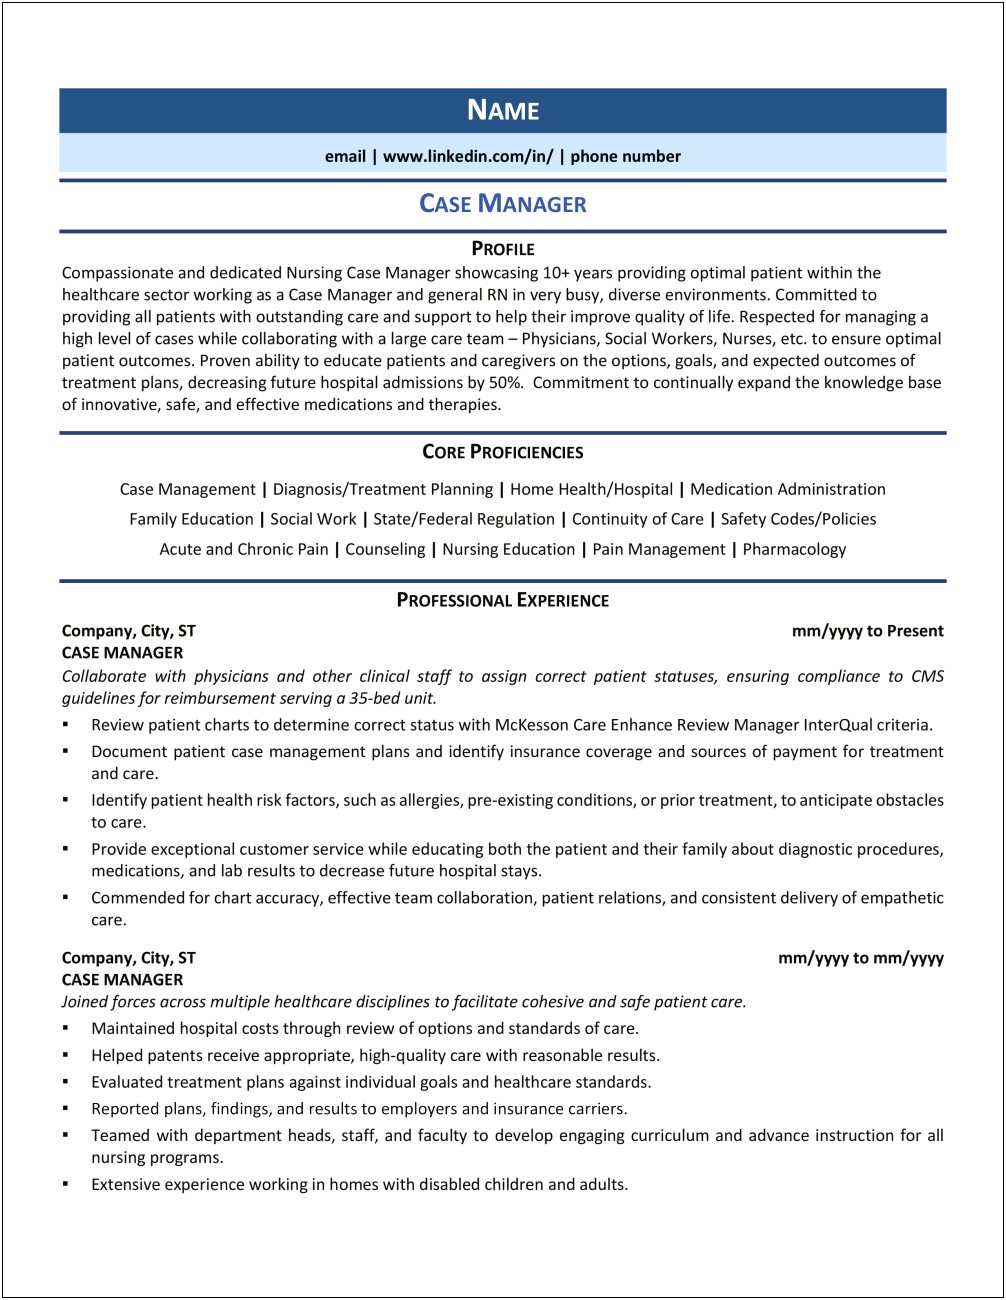 Sample Resume Employment Case Manager